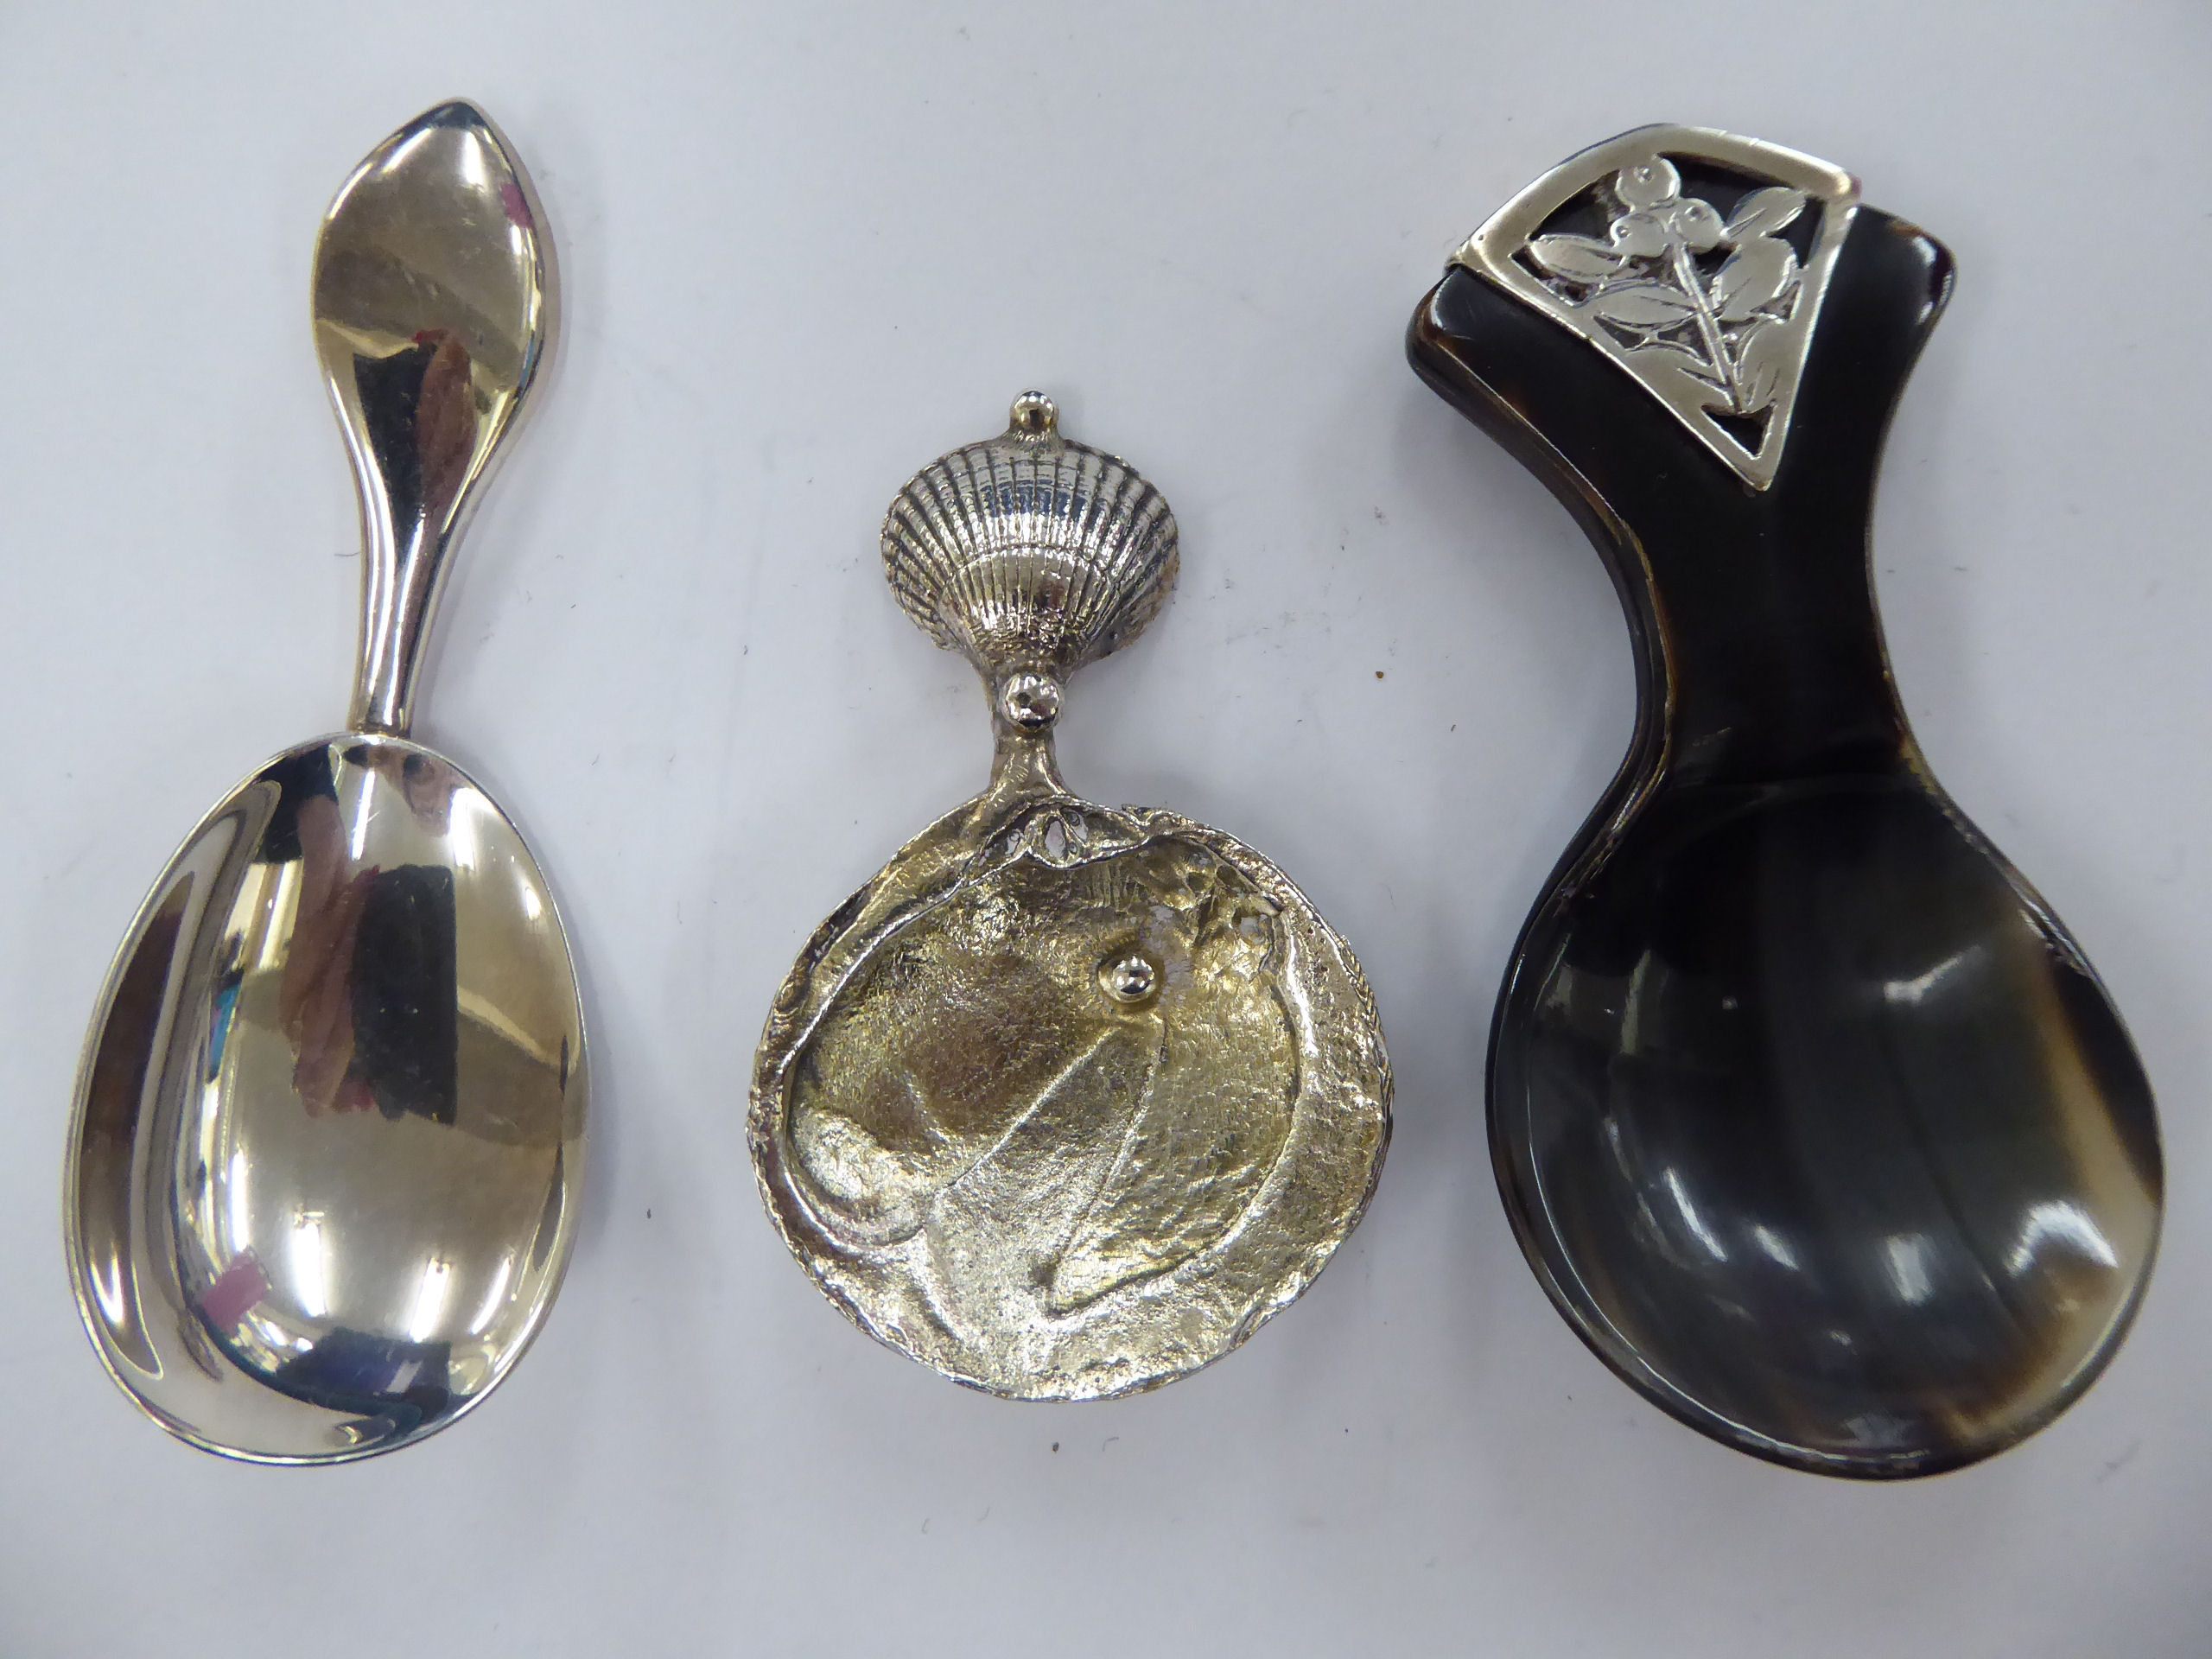 A cast silver caddy spoon, the bowl fashioned as a pearl in an oyster shell,